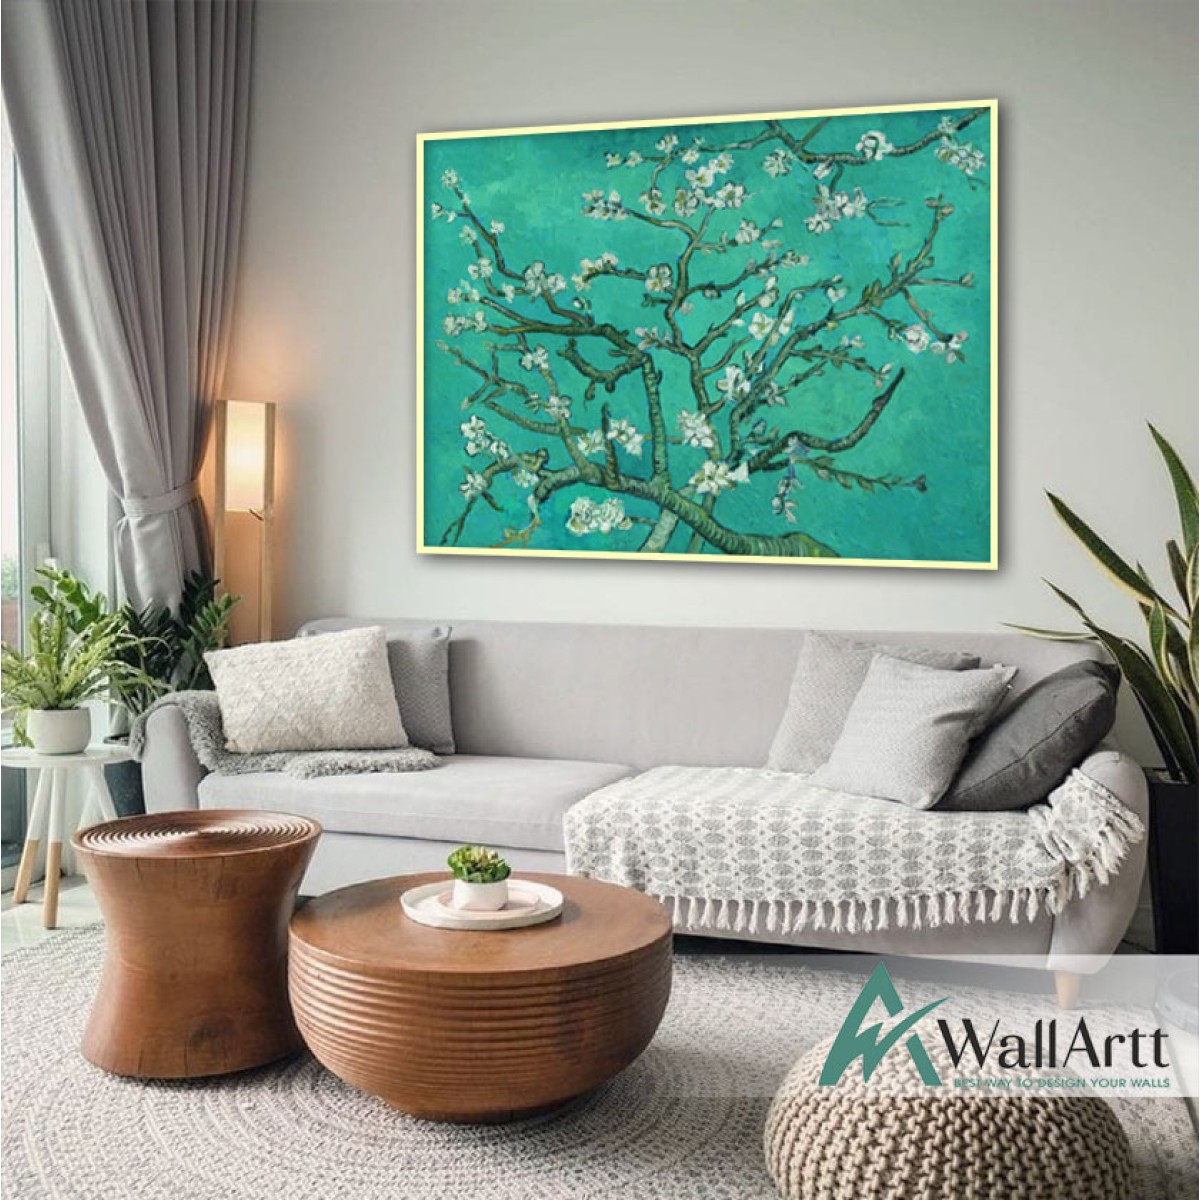 Van Gogh Almond Blossoms Textured Partial Oil Painting